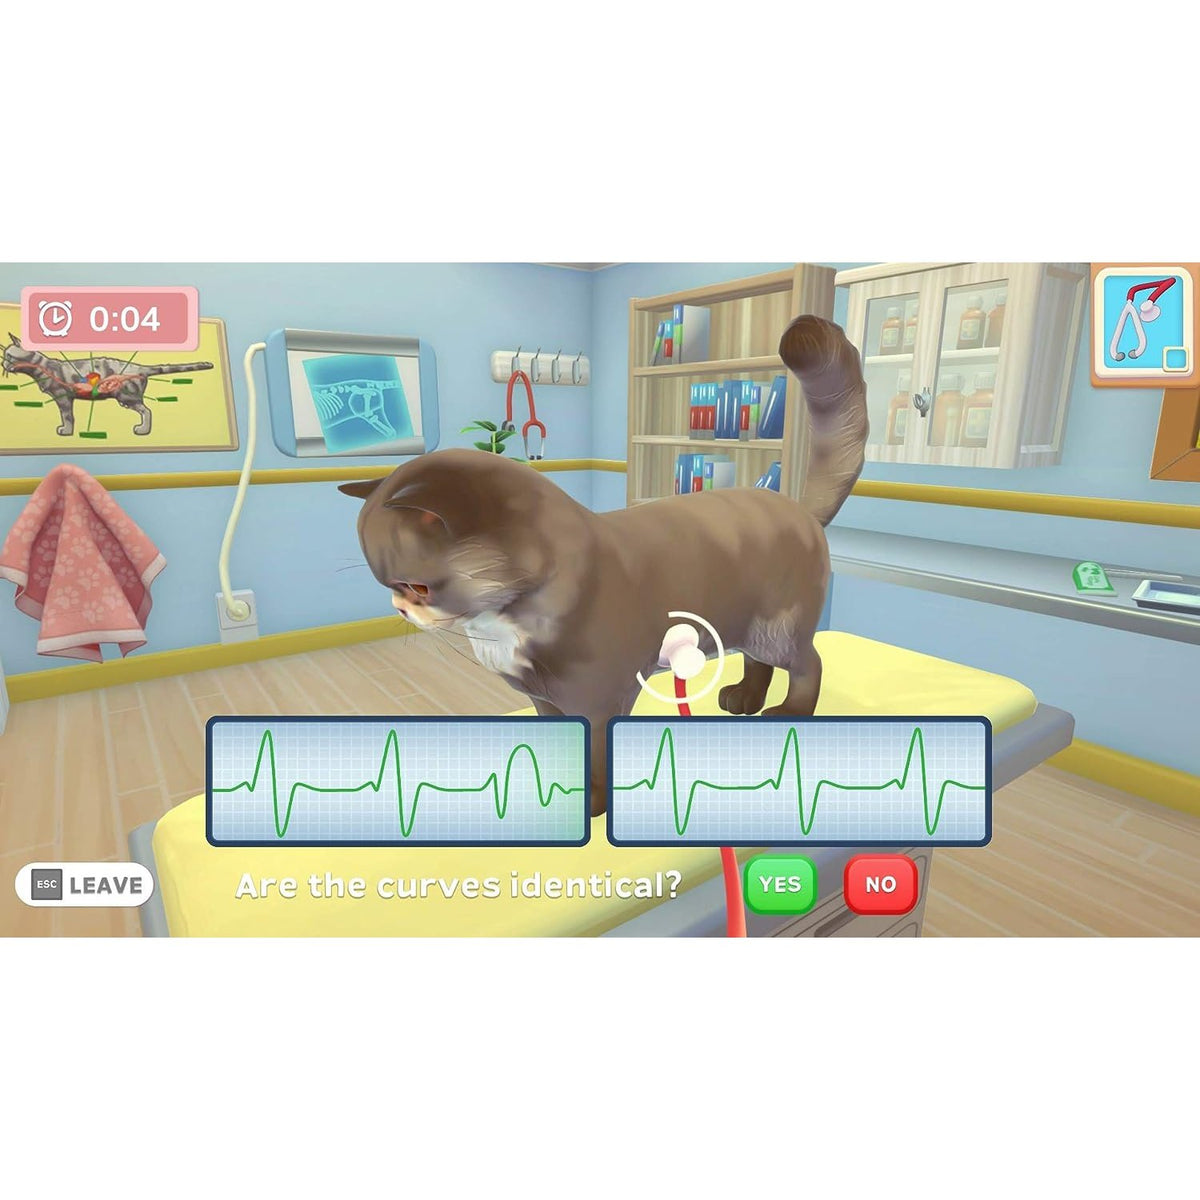 My Universe: Pet Clinic - Cats & Dogs Sony PlayStation 4